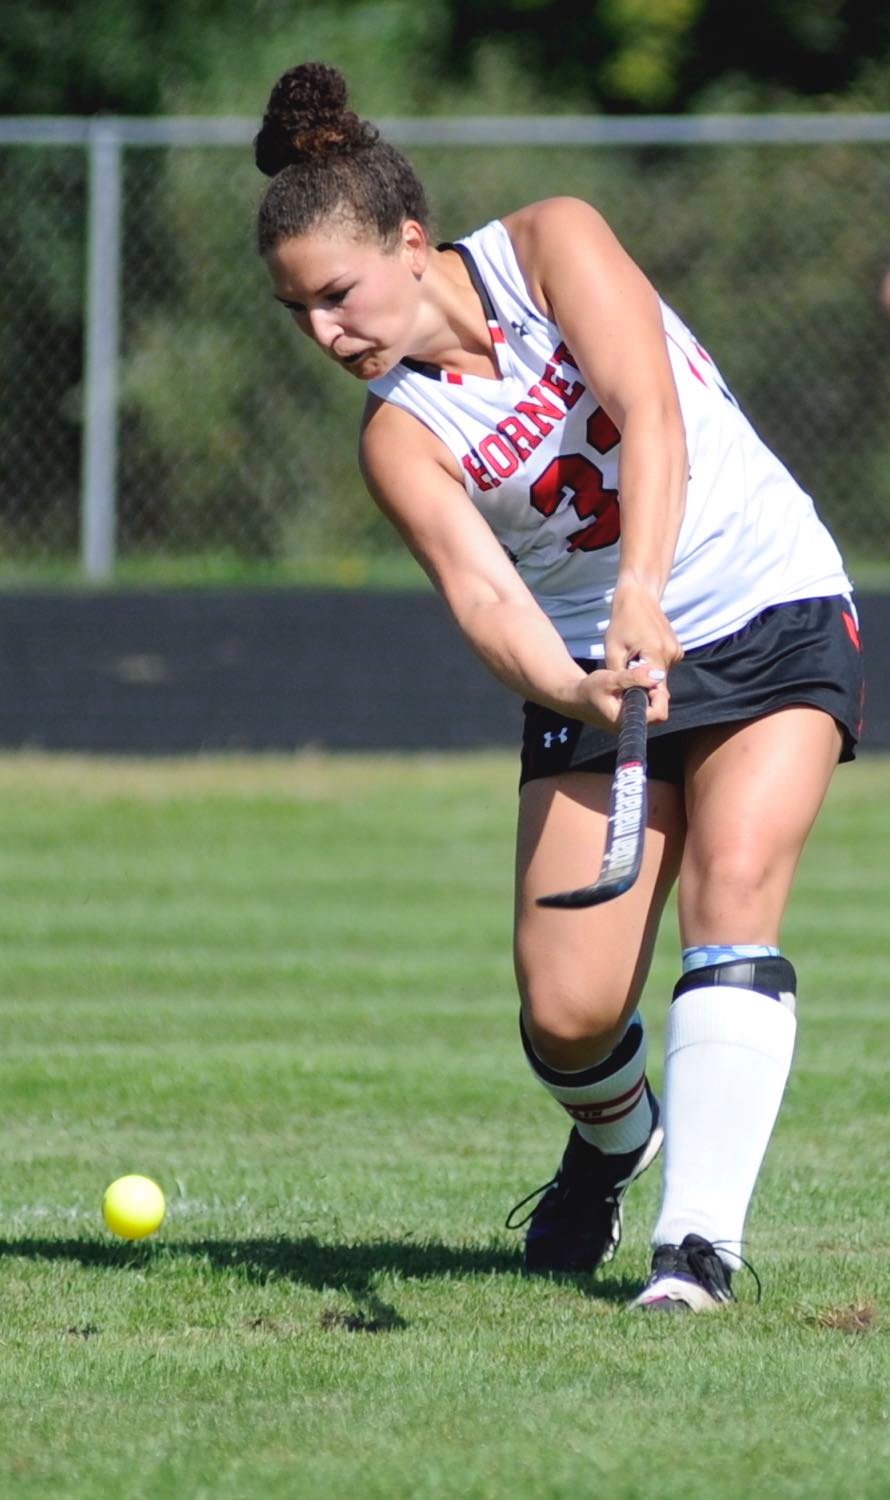 Honesdale’s co-captain, senior Rowan Murray, scored in the first half of the Lady Hornets’ 5-0 win over the Lady Buckhorns of Wallenpaupack Area High School.